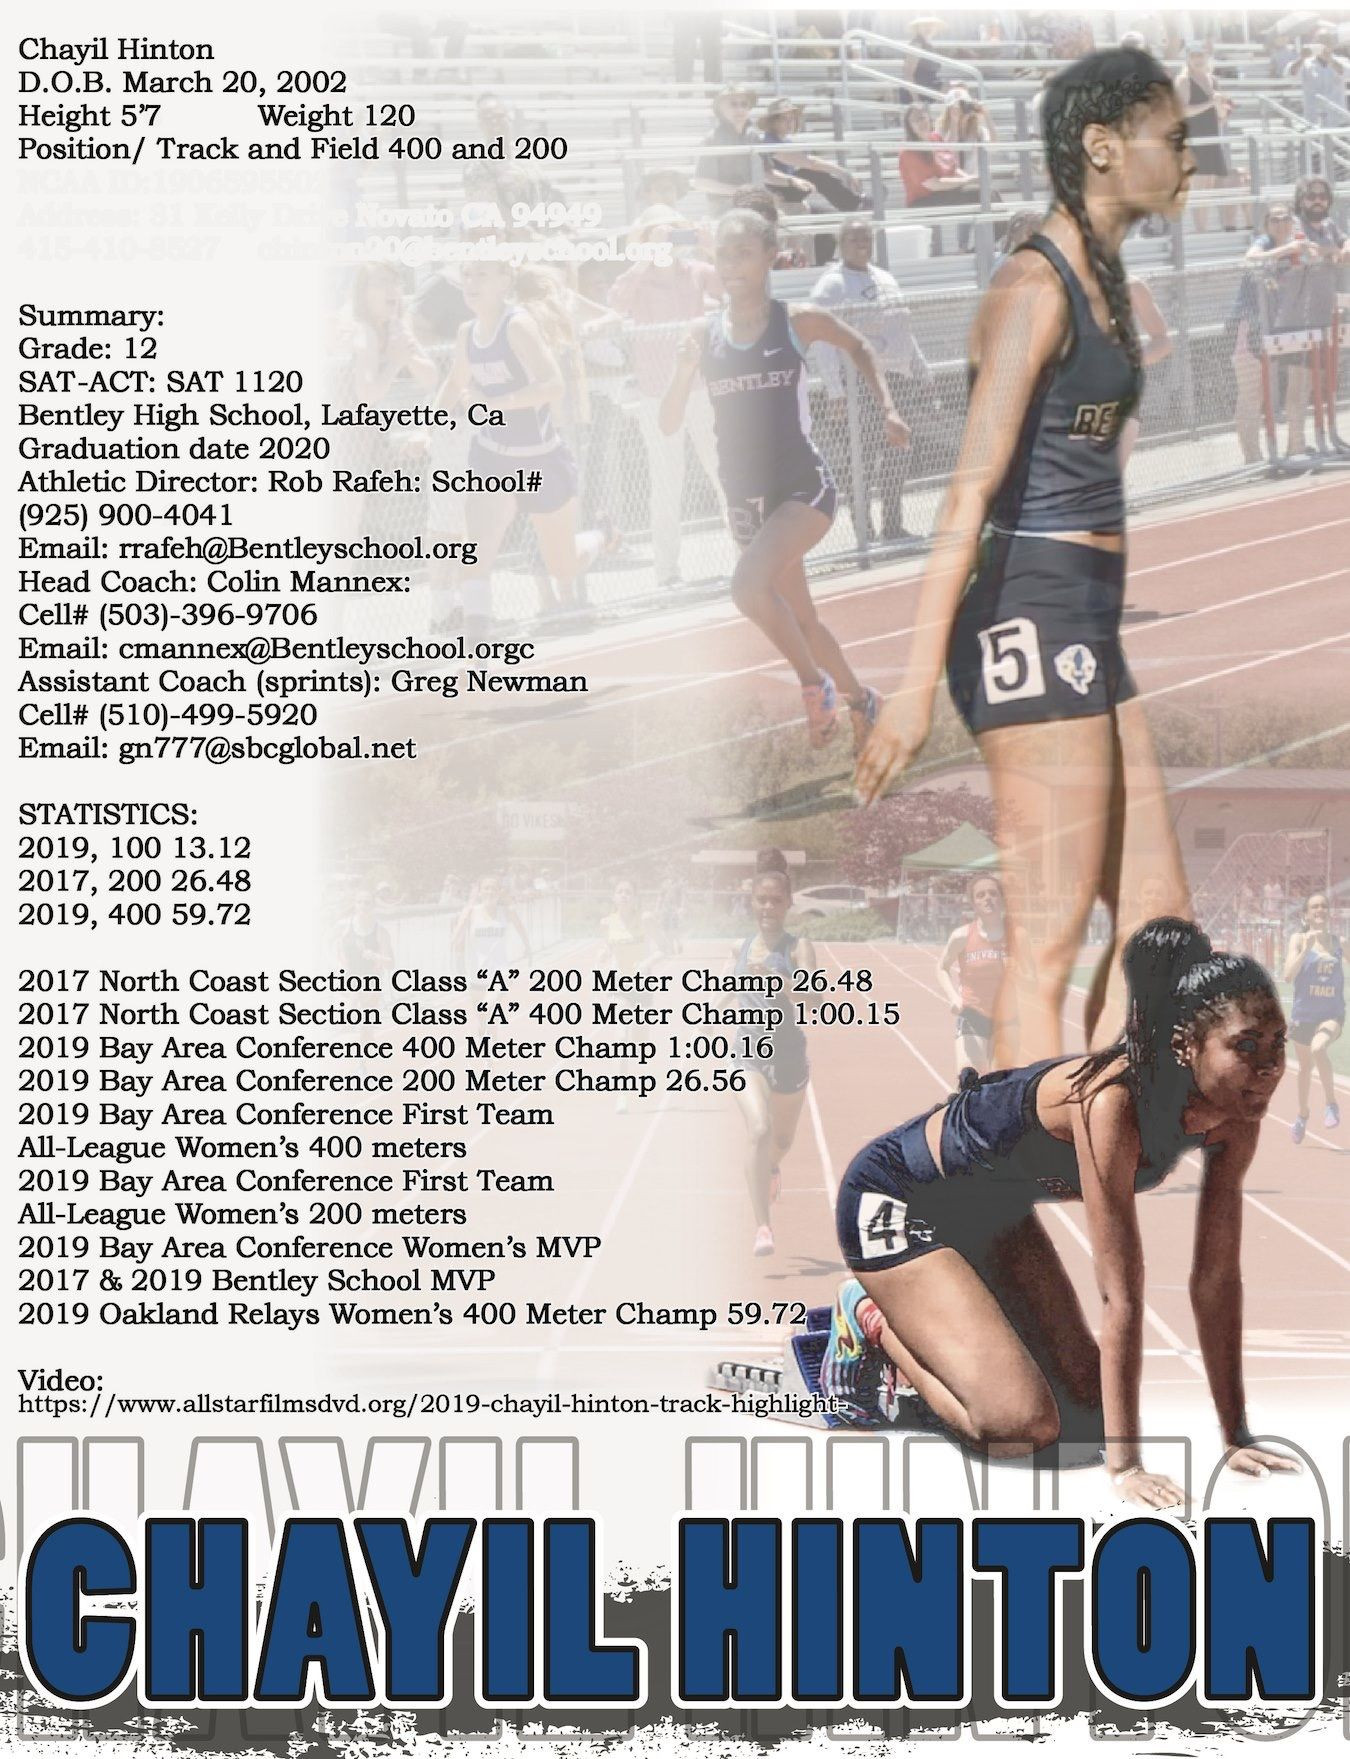 Track and Field Resume athlete Sample Recruiting Resume College Recruiting, Recruitment Resume …